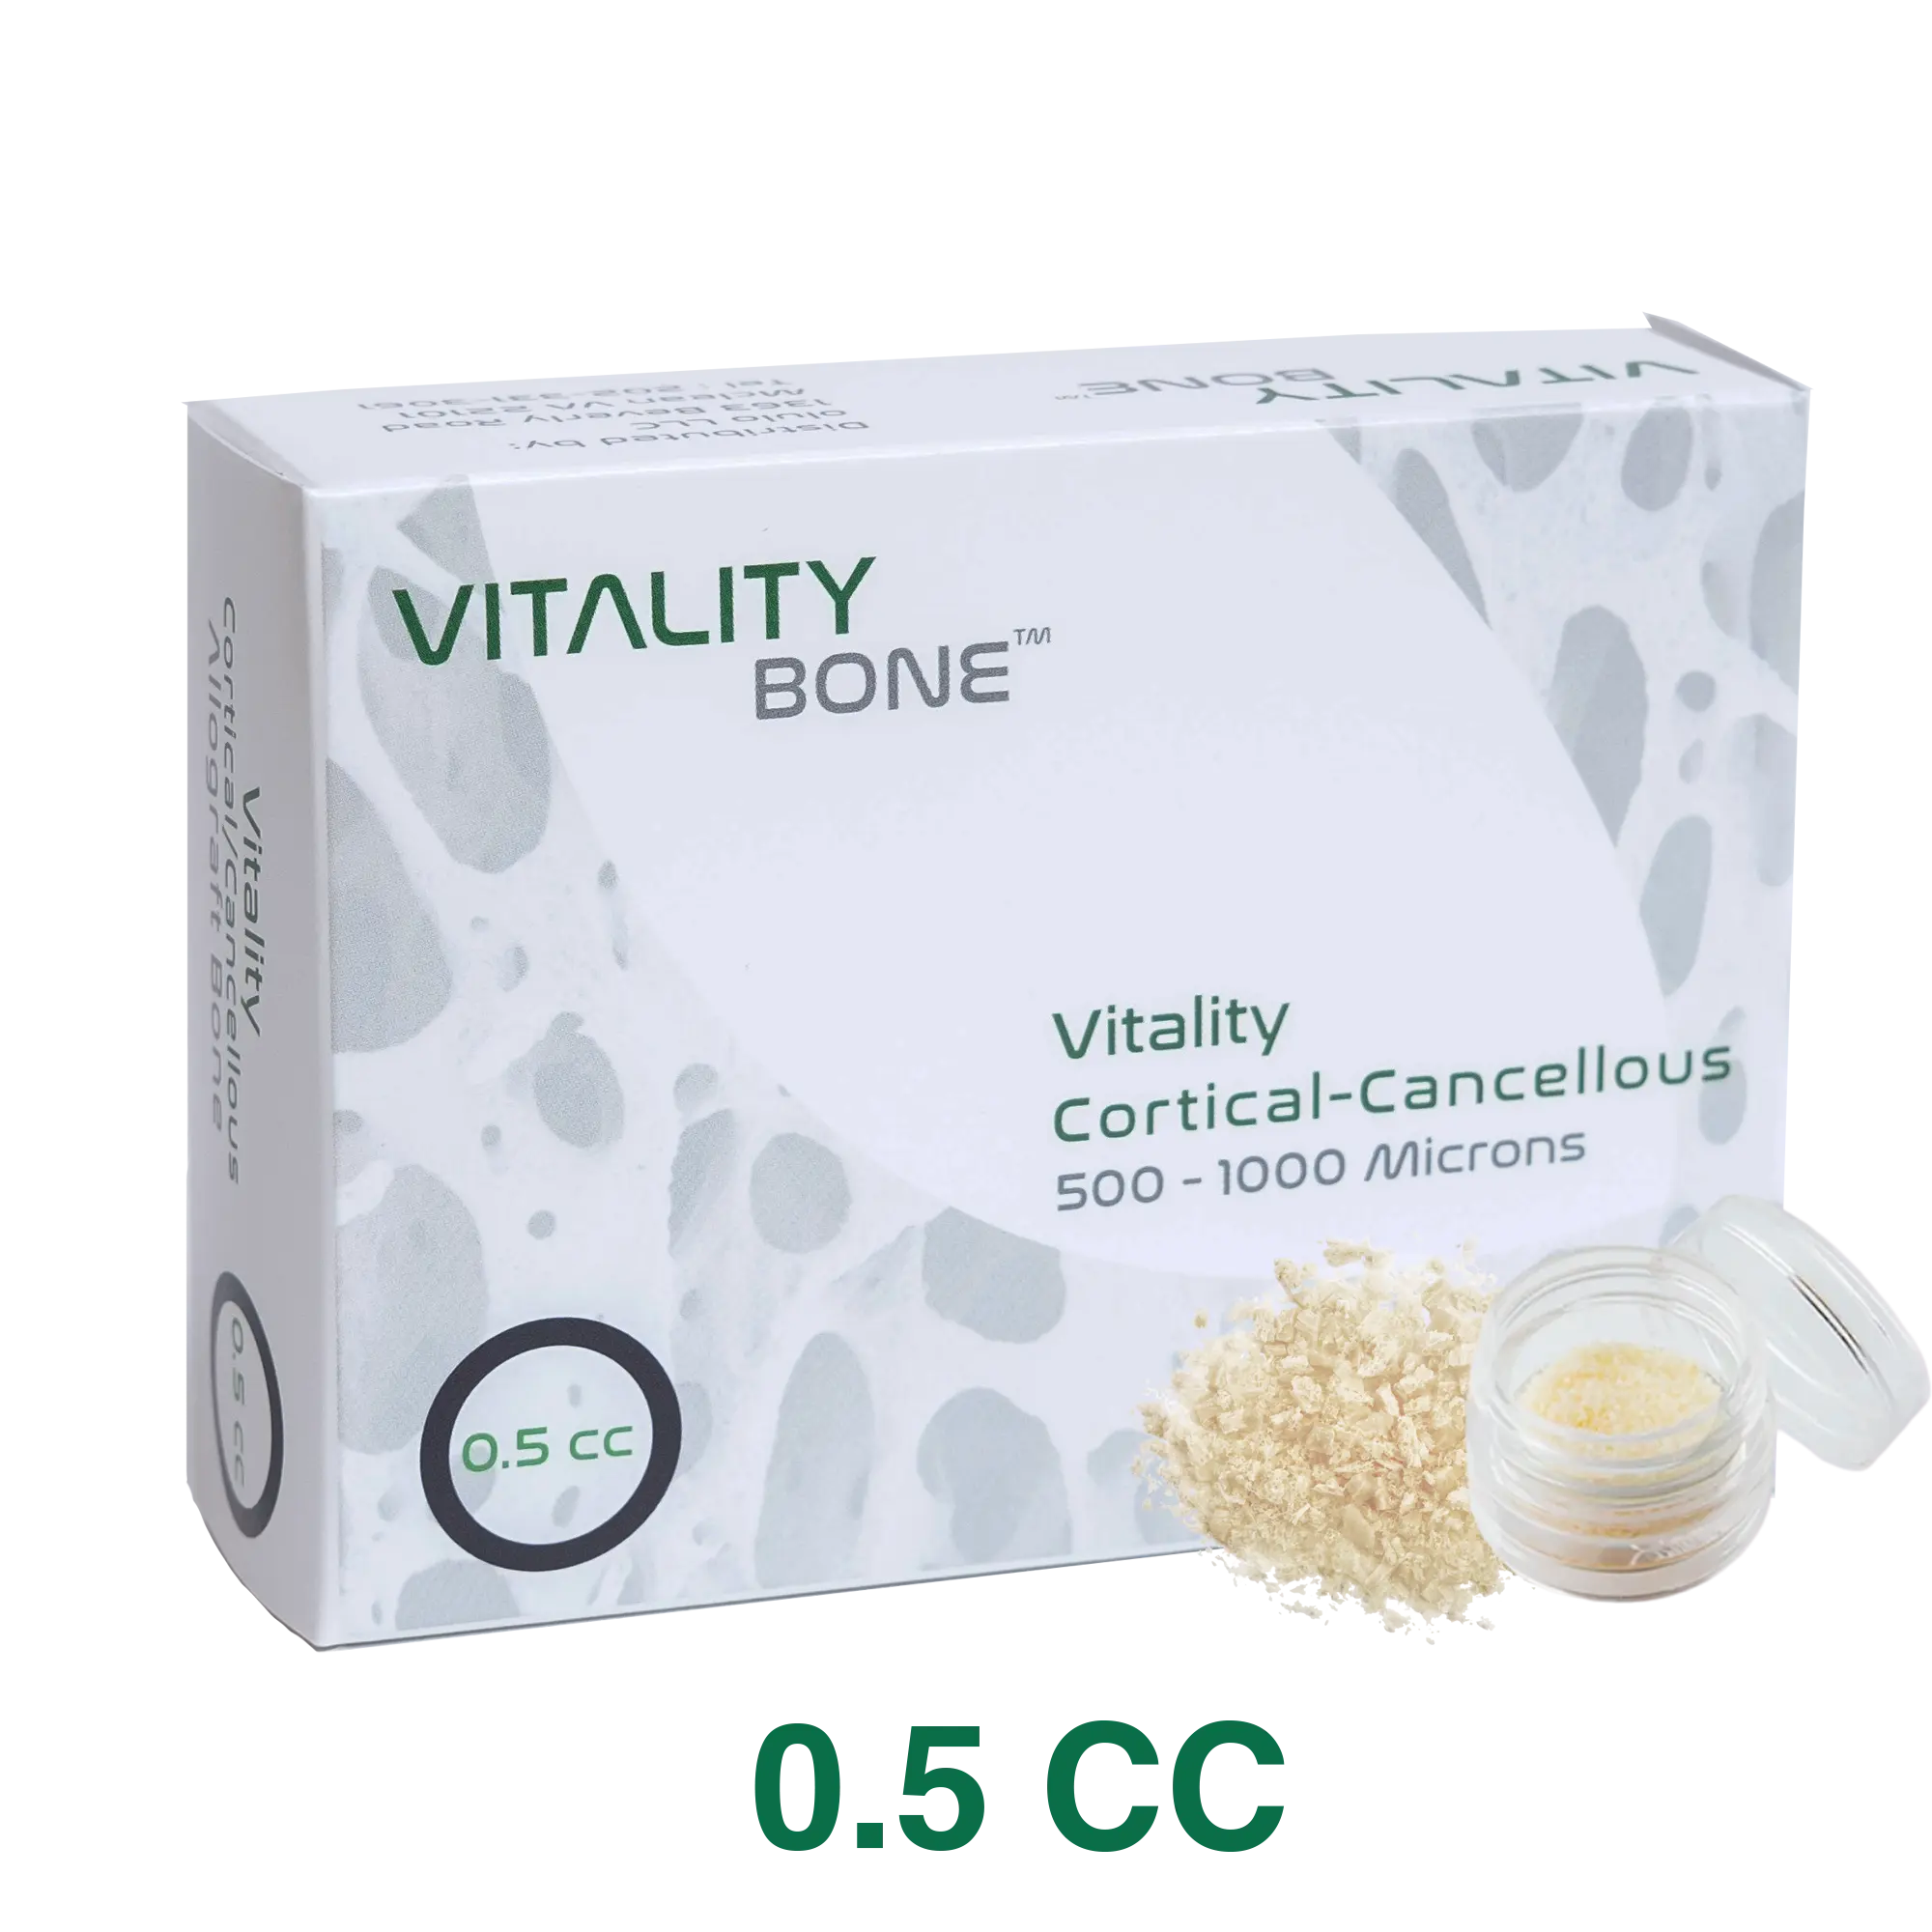 10 Boxes Vitality™ 0.5 CC Allograft Blend + 2 Boxes of Suture Gift